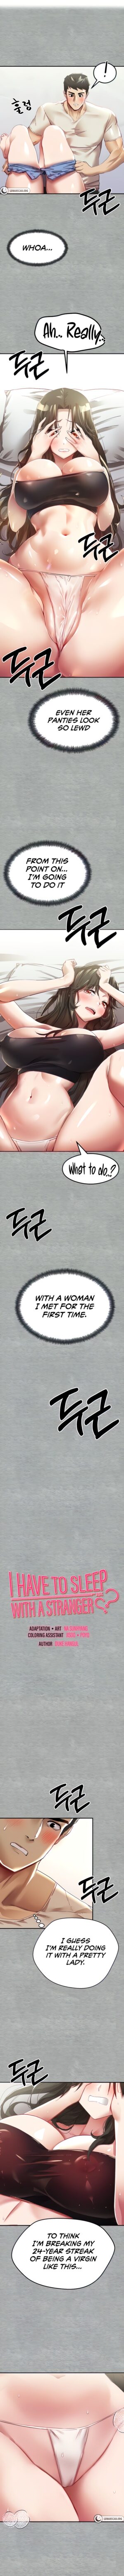 [Duke Hangul, Na Sunhyang] I Have To Sleep With A Stranger? (1-13) [English] [Lunar Scans] [Ongoing]